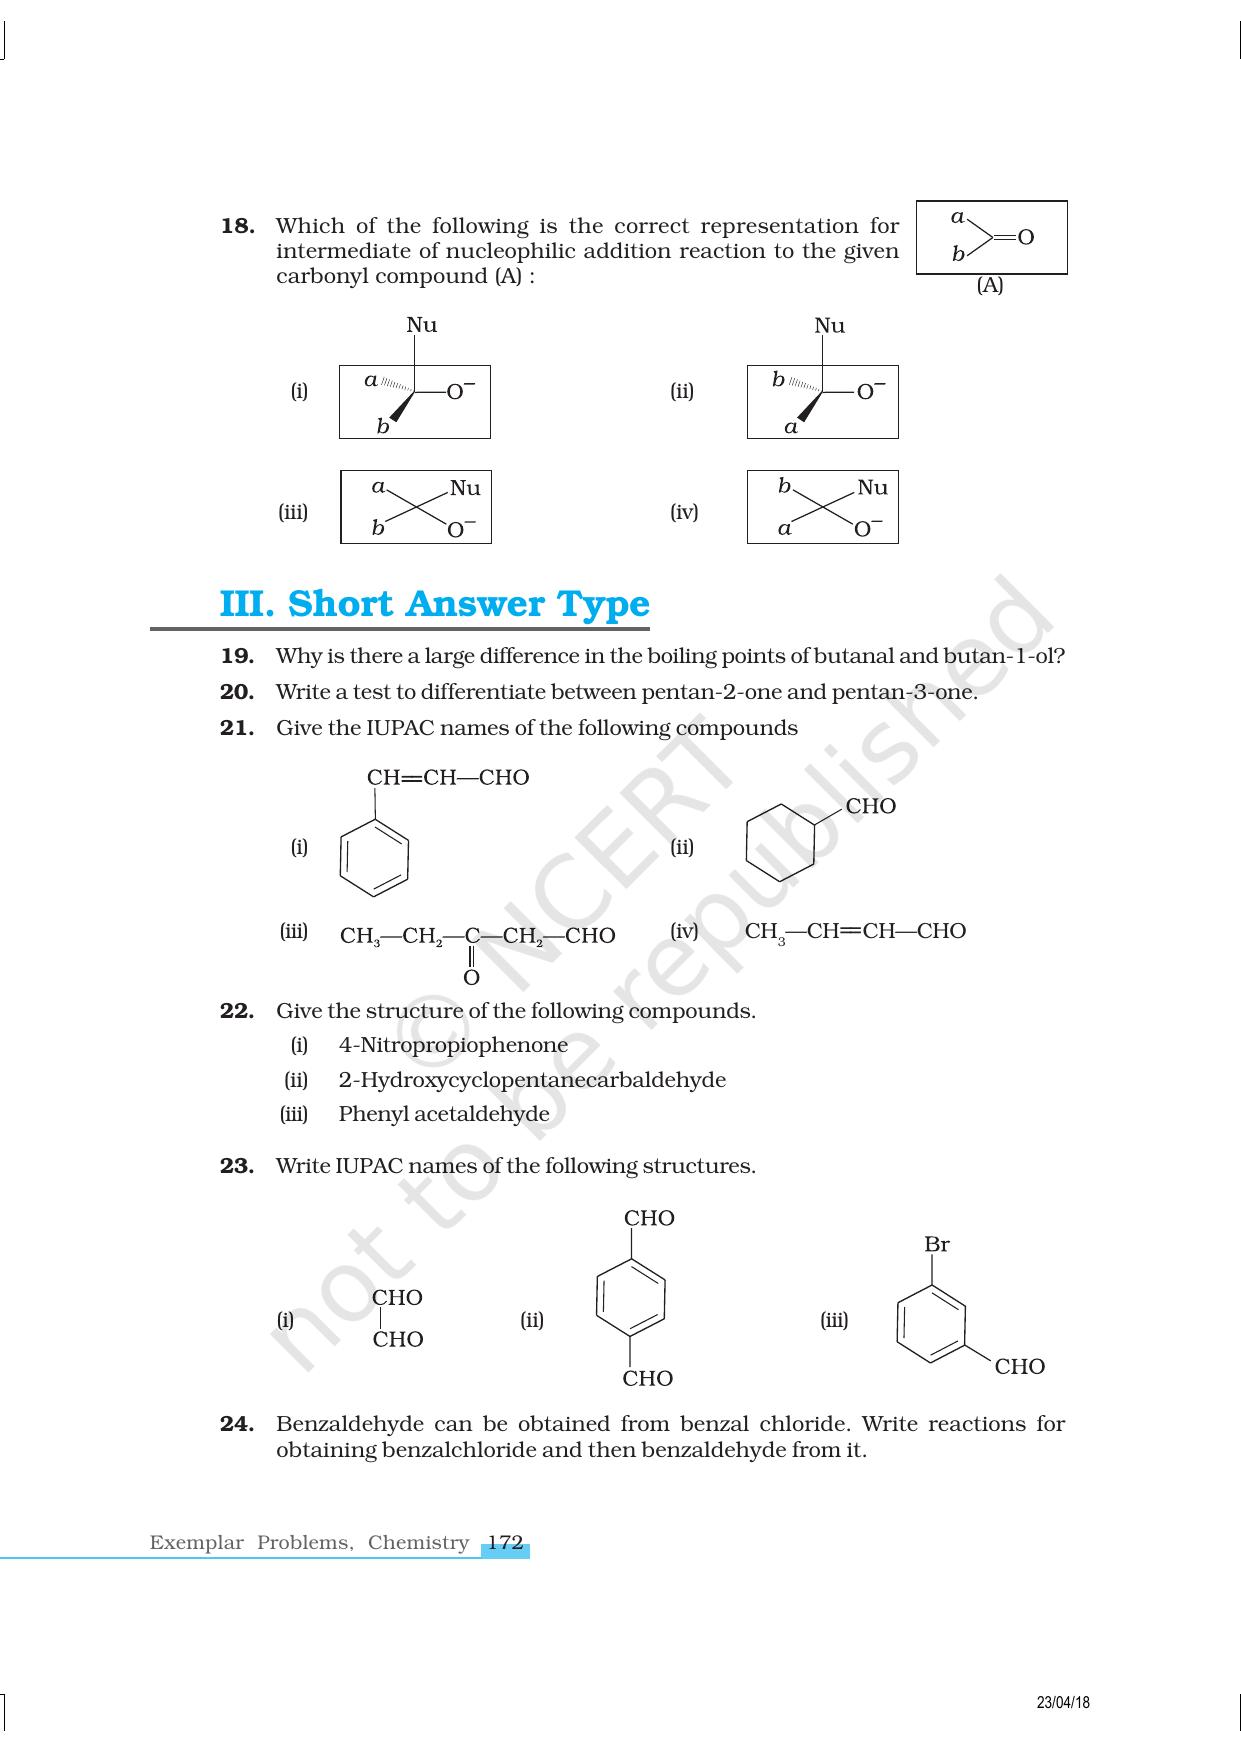 NCERT Exemplar Book for Class 12 Chemistry: Chapter 12 Aldehydes, Ketones and Carboxylic Acids - Page 5